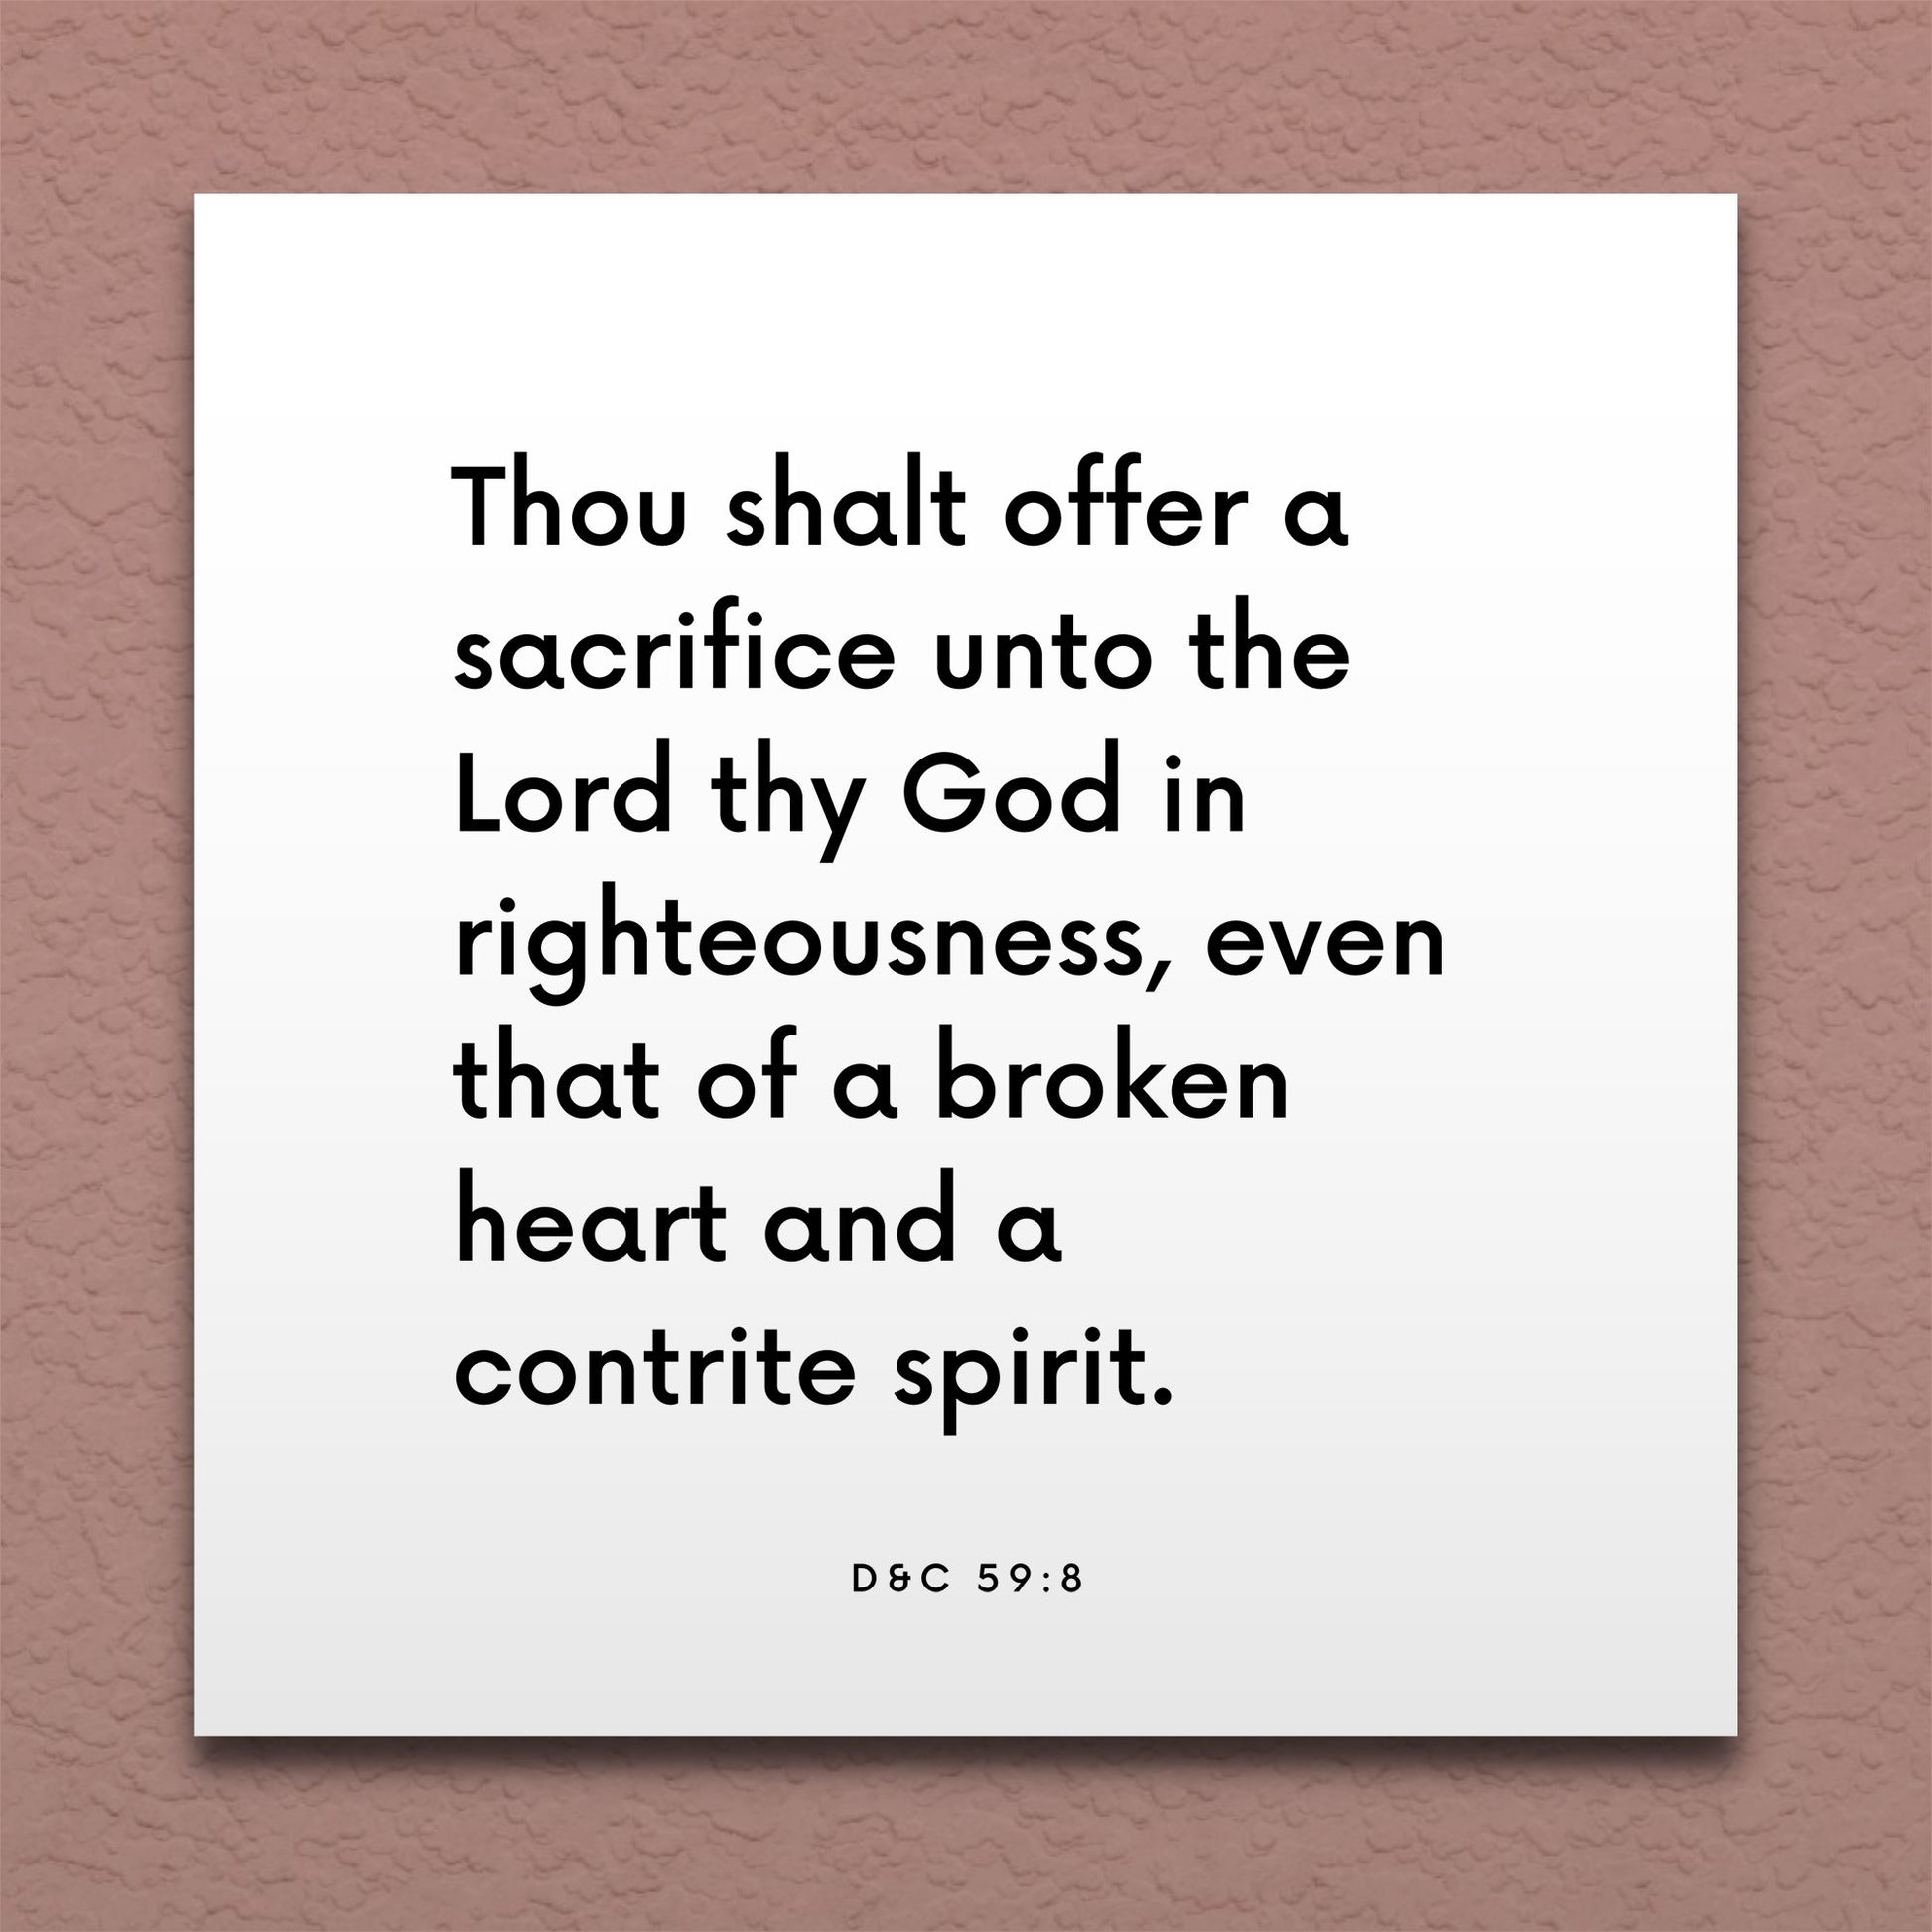 Wall-mounted scripture tile for D&C 59:8 - "Thou shalt offer a sacrifice unto the Lord thy God"